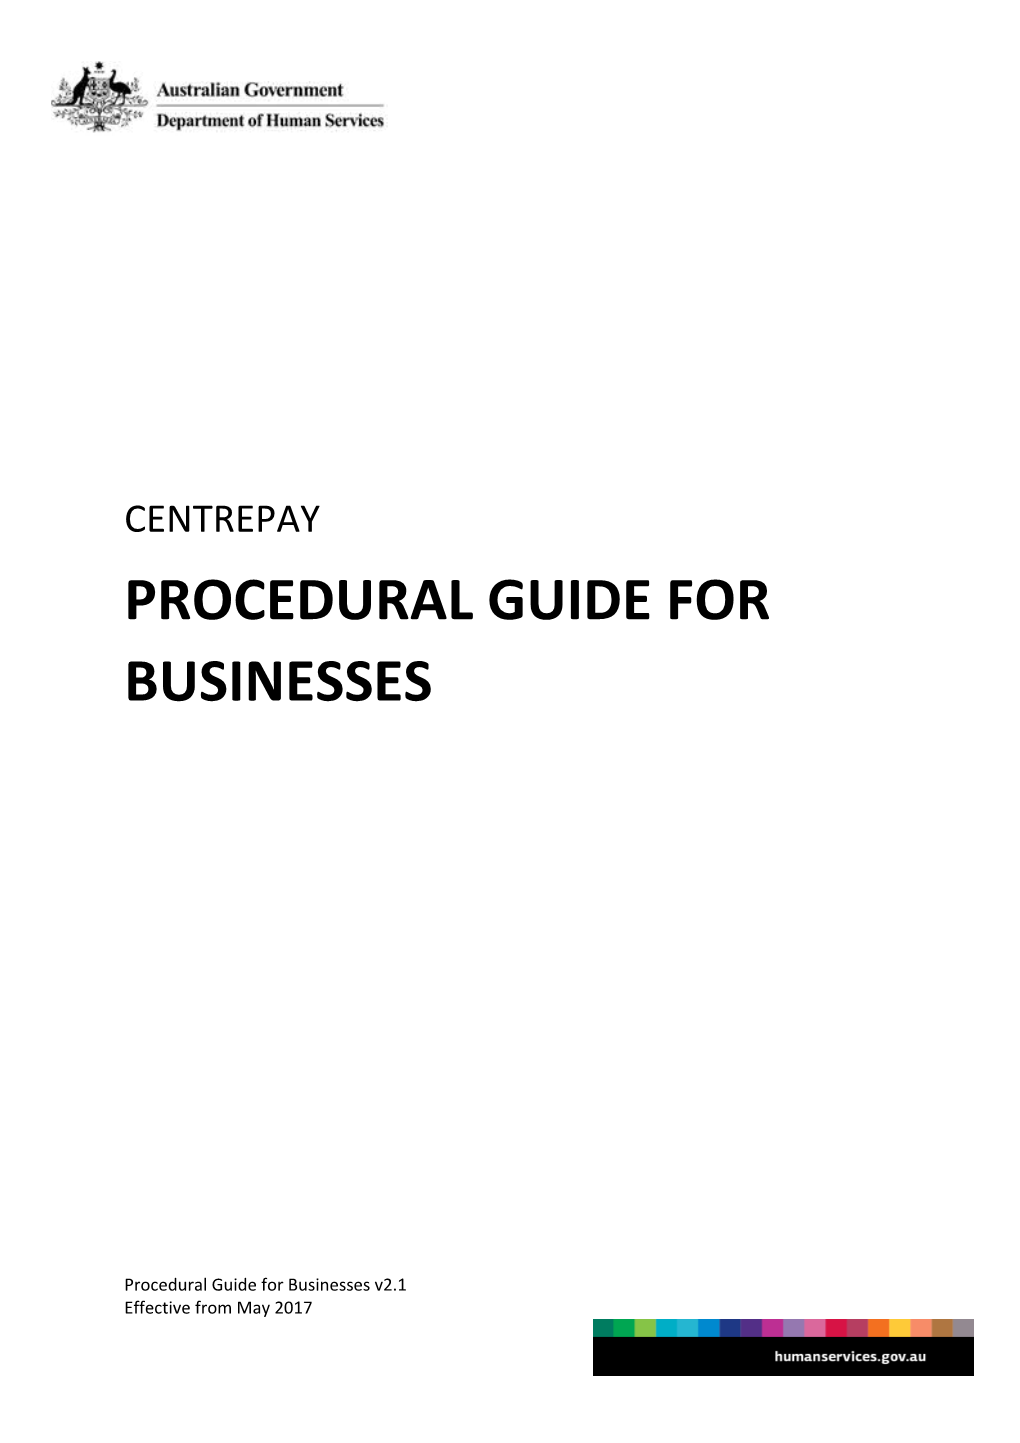 Procedural Guide for Businesses